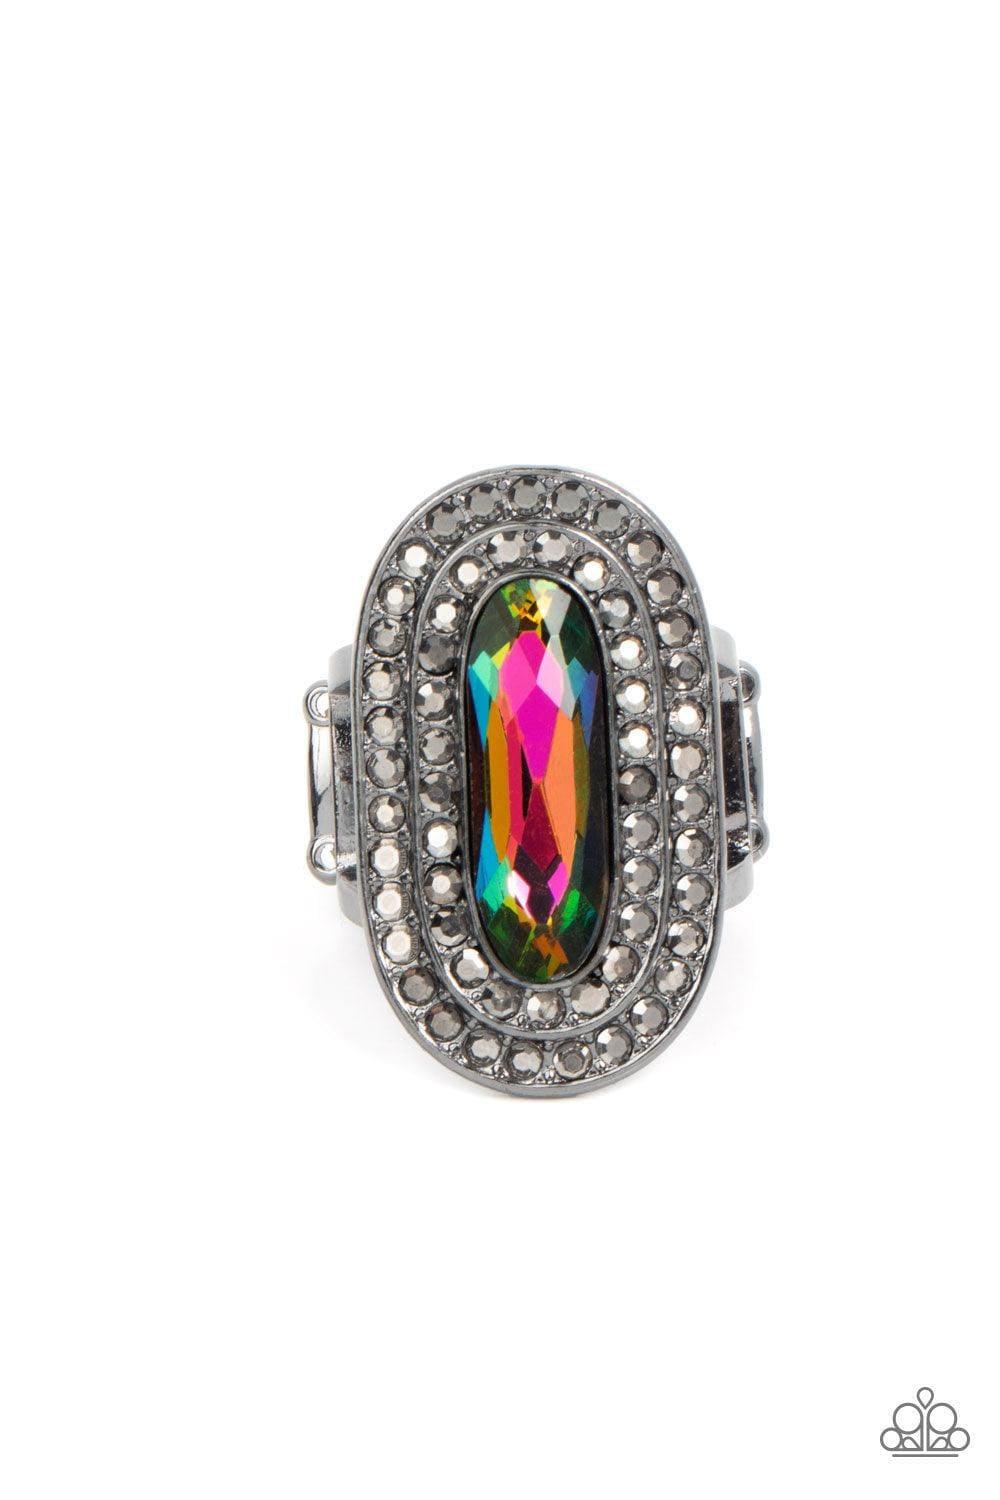 Paparazzi Accessories - Fueled By Fashion - Multicolor Oil-spill Ring - Bling by JessieK